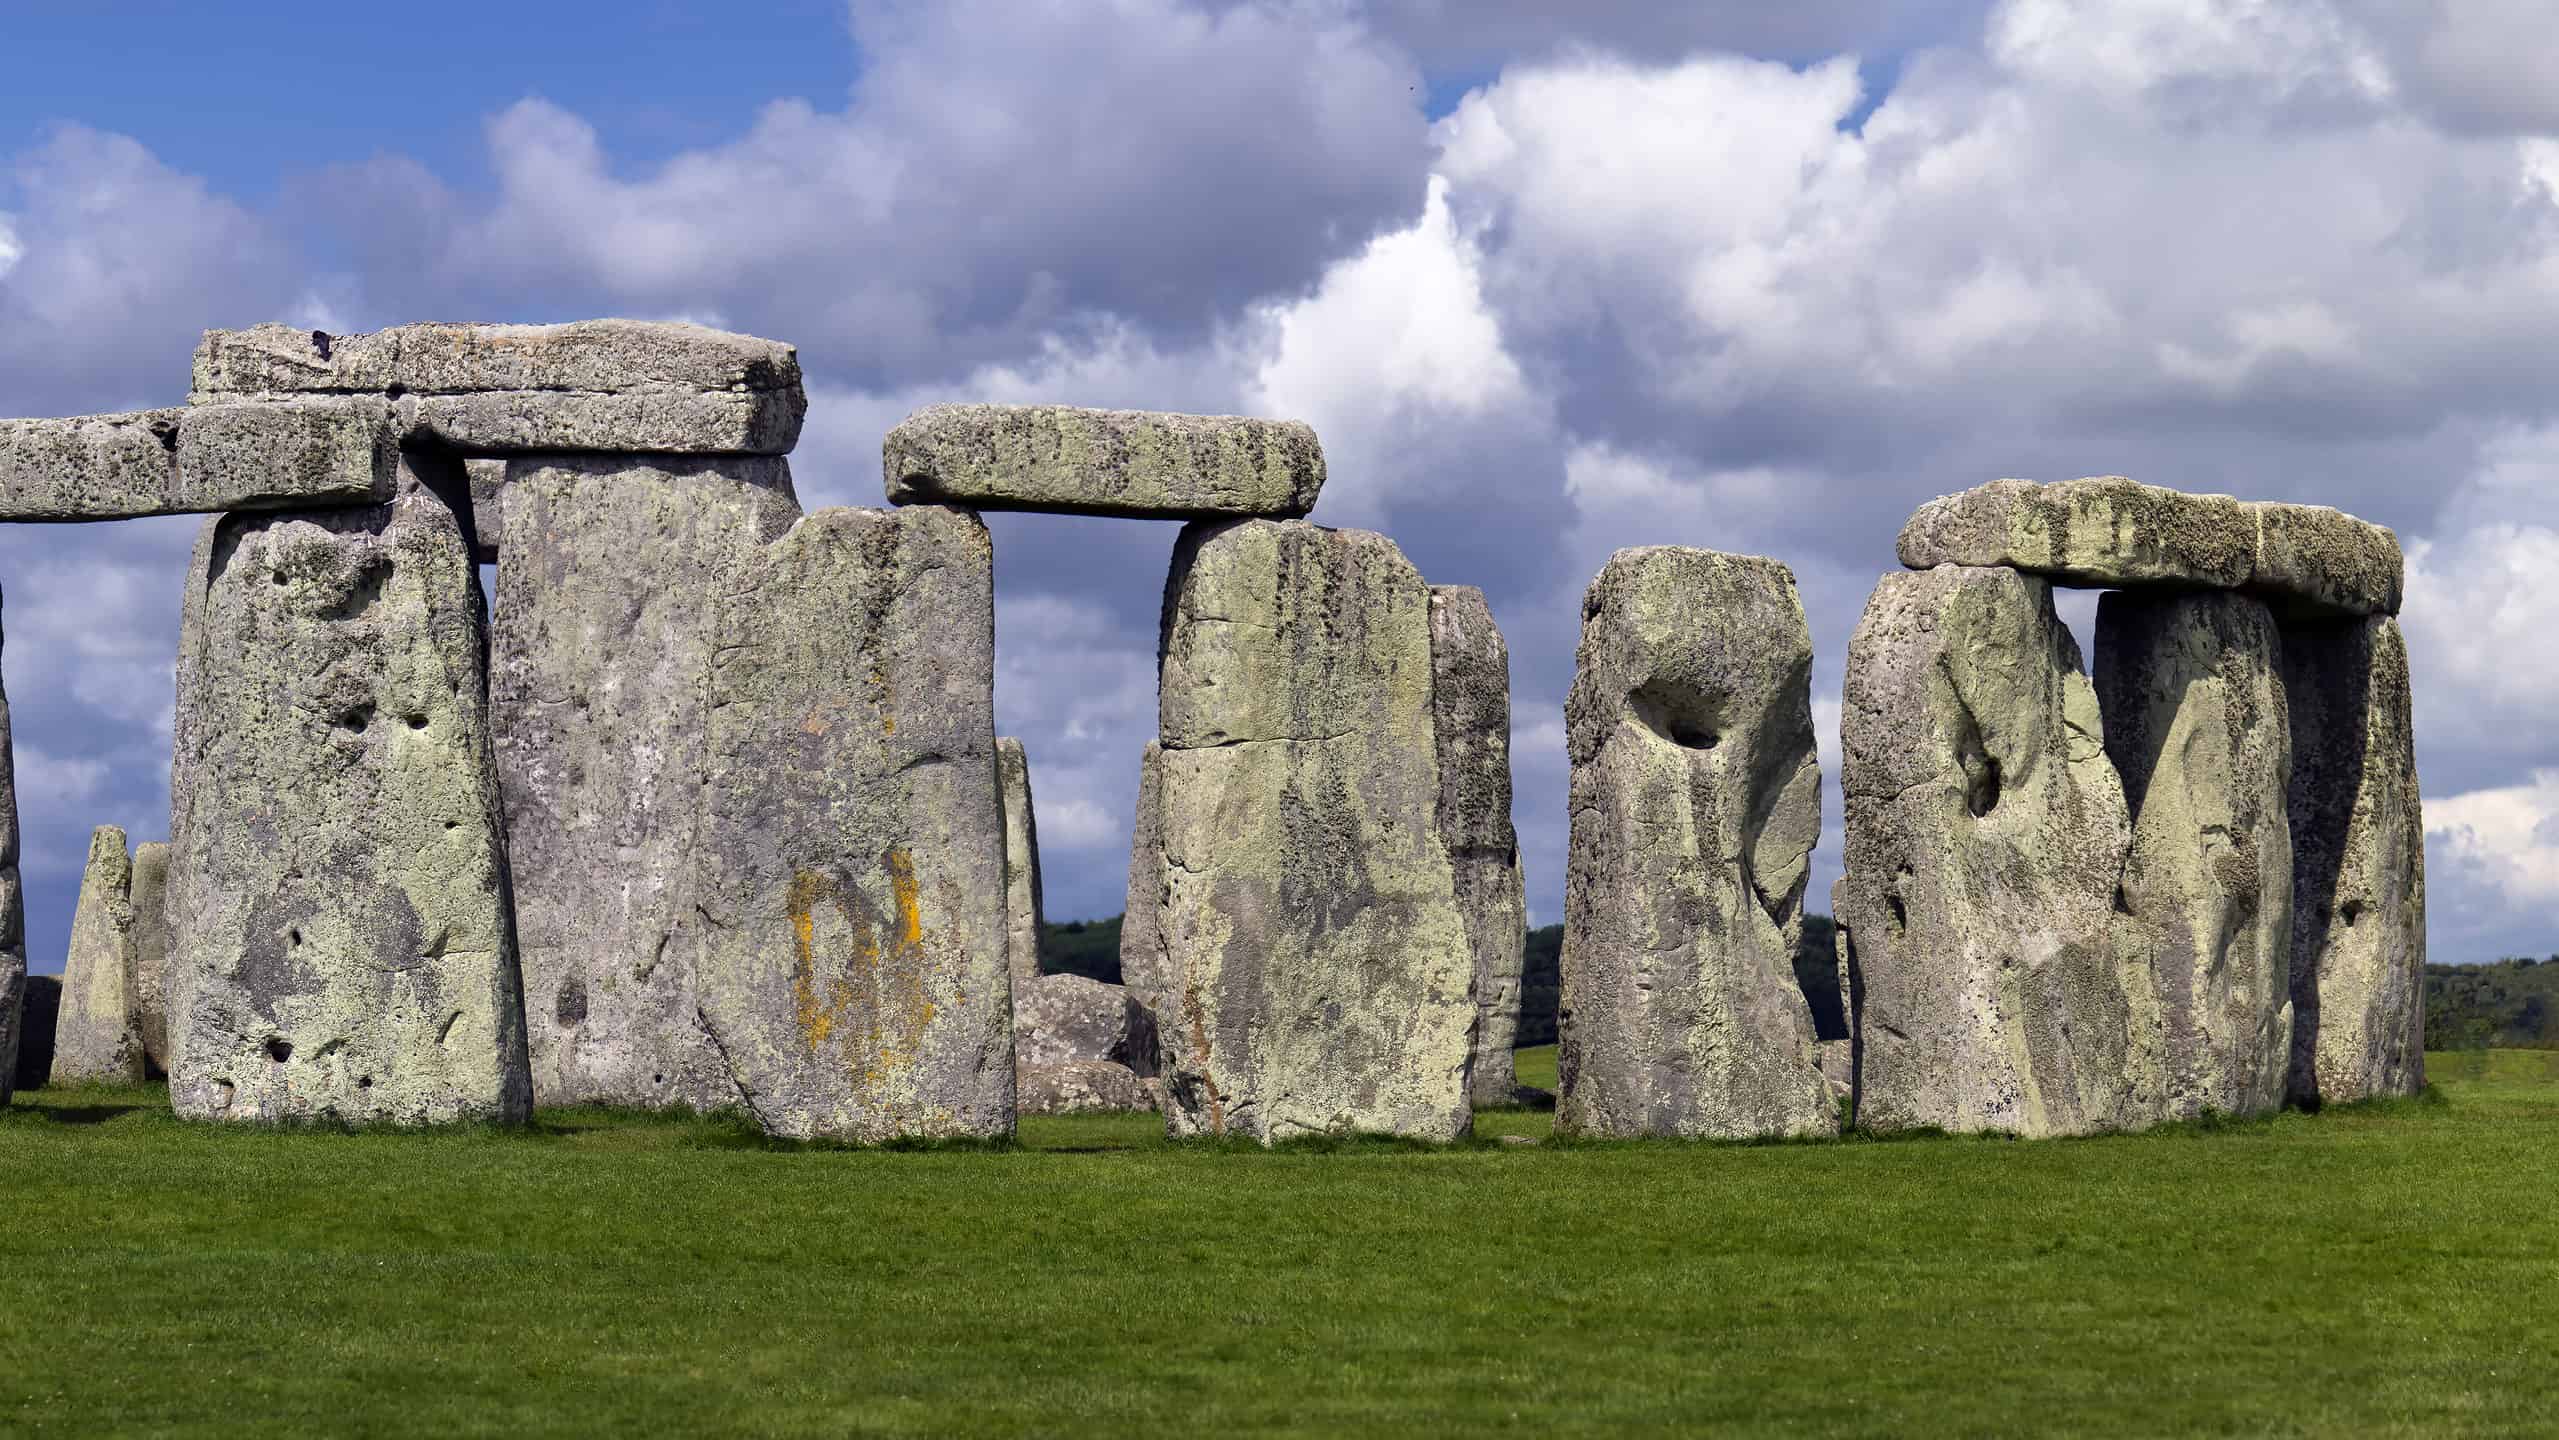 <p>Standing in an English field next to the A30 road is a 5,000-year-old circular prehistoric monument called <a href="https://www.english-heritage.org.uk/visit/places/stonehenge/history-and-stories/stonehenge360/">Stonehenge</a>. This incredible engineering feat is older than Egypt's pyramids and Julius Caesar's Rome.</p>    <p>This circle of standing stone, brought from <a href="https://a-z-animals.com/blog/the-flag-of-wales-history-meaning-and-symbolism/?utm_campaign=msn&utm_source=msn_slideshow&utm_content=1325965&utm_medium=in_content">Wales</a>, has mystified archaeologists for years. Modern research suggests it is just one small part of a wider complex, but its purpose is still unclear.</p>    <p>Around 1.5 million annual tourists visit to wonder why Stone Age humans constructed this space. It's one of Britain's most popular UNESCO heritage sites.</p><p>Sharks, lions, alligators, and more! Don’t miss today’s latest and most exciting animal news. <strong><a href="https://www.msn.com/en-us/channel/source/AZ%20Animals%20US/sr-vid-7etr9q8xun6k6508c3nufaum0de3dqktiq6h27ddeagnfug30wka">Click here to access the A-Z Animals profile page</a> and be sure to hit the <em>Follow</em> button here or at the top of this article!</strong></p> <p>Have feedback? Add a comment below!</p>